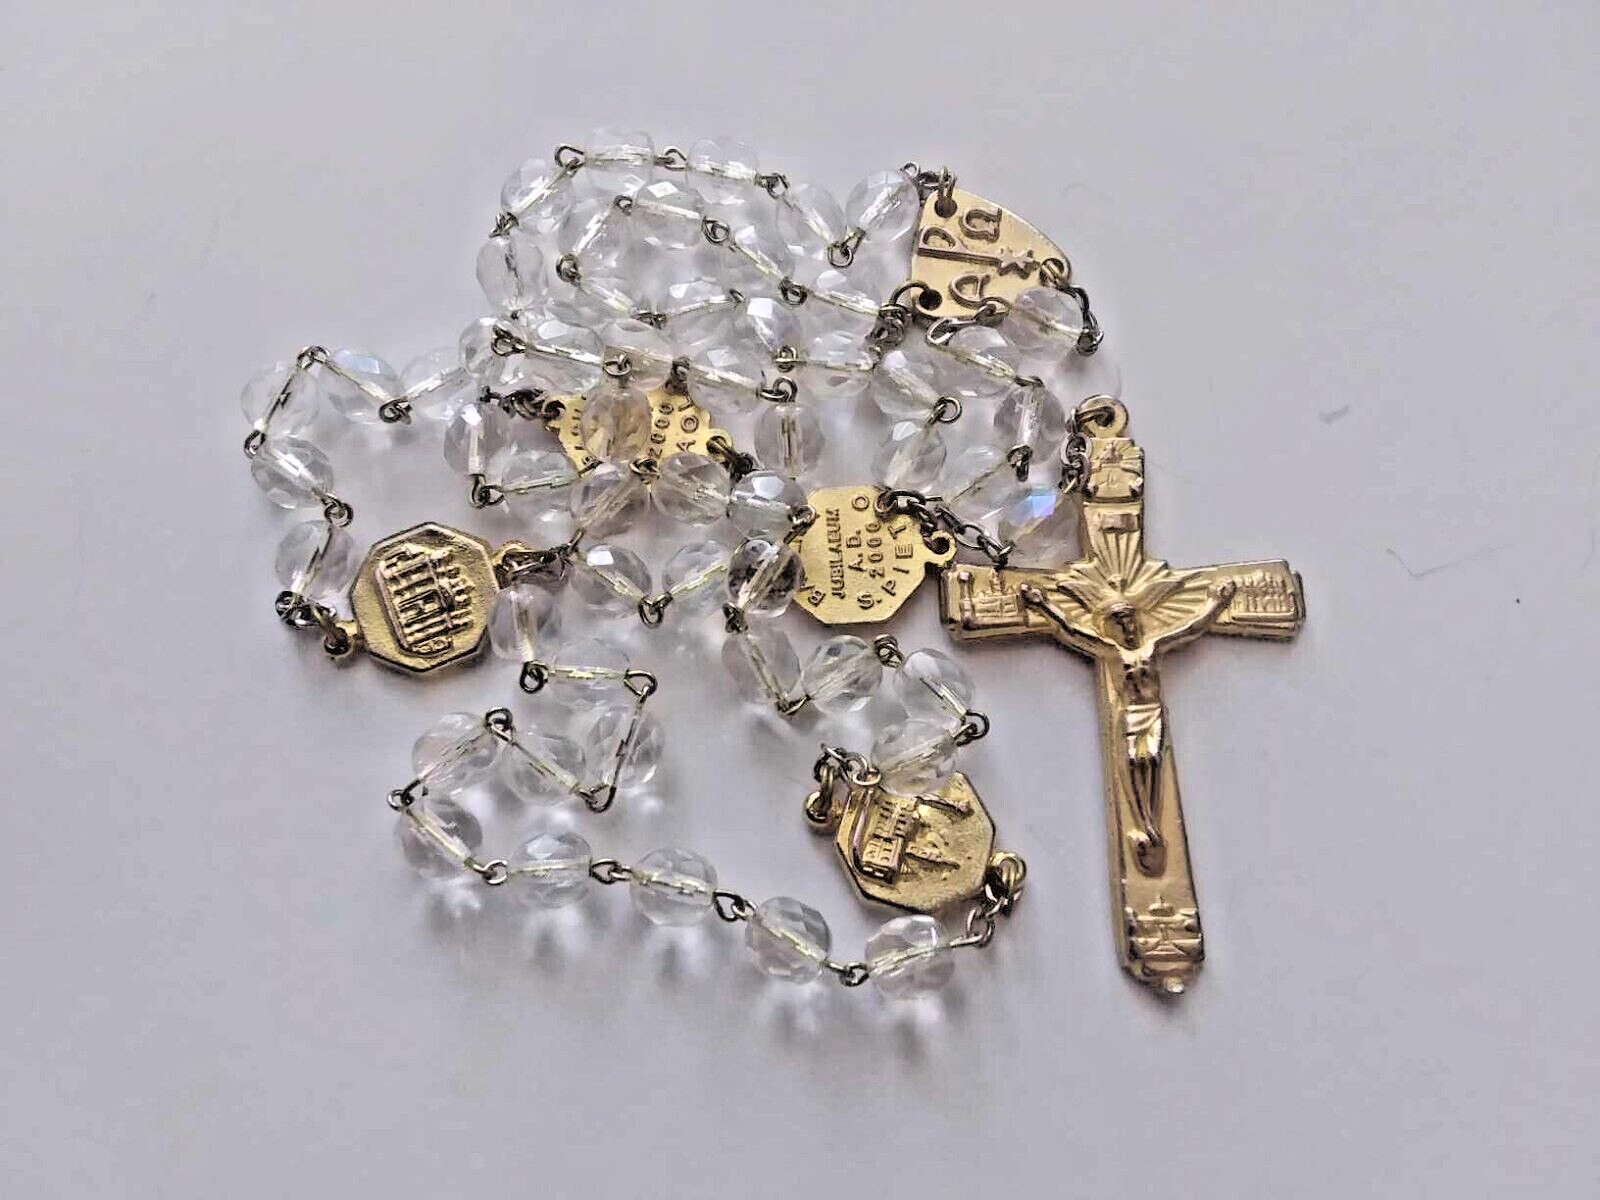 POPE JOHN PAUL II BLESSED VATICAN JUBILEE ROSARY A.D 2000 FOR CHILDHOOD FRIEND